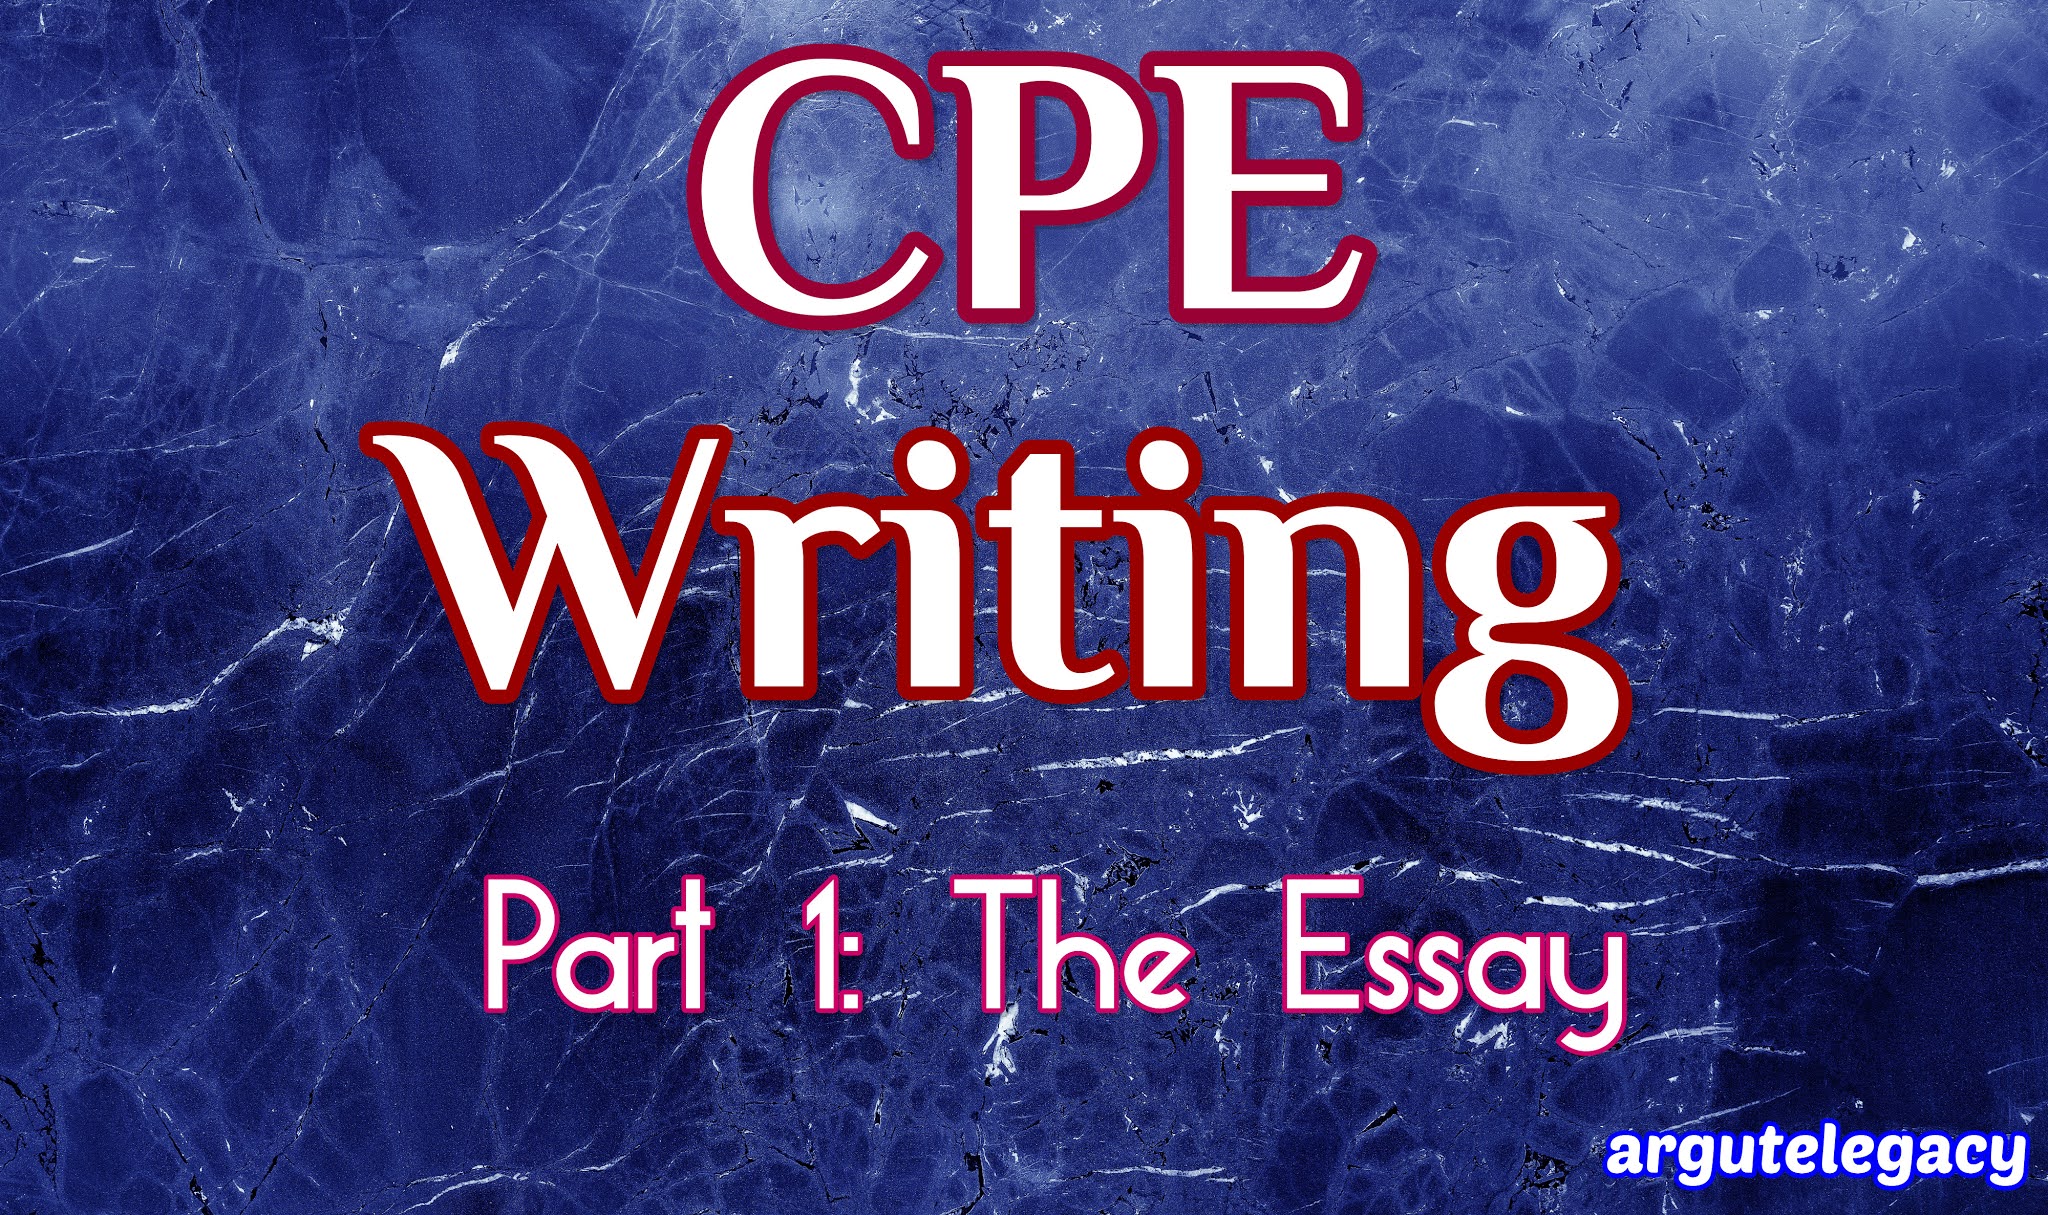 cpe writing essay tips